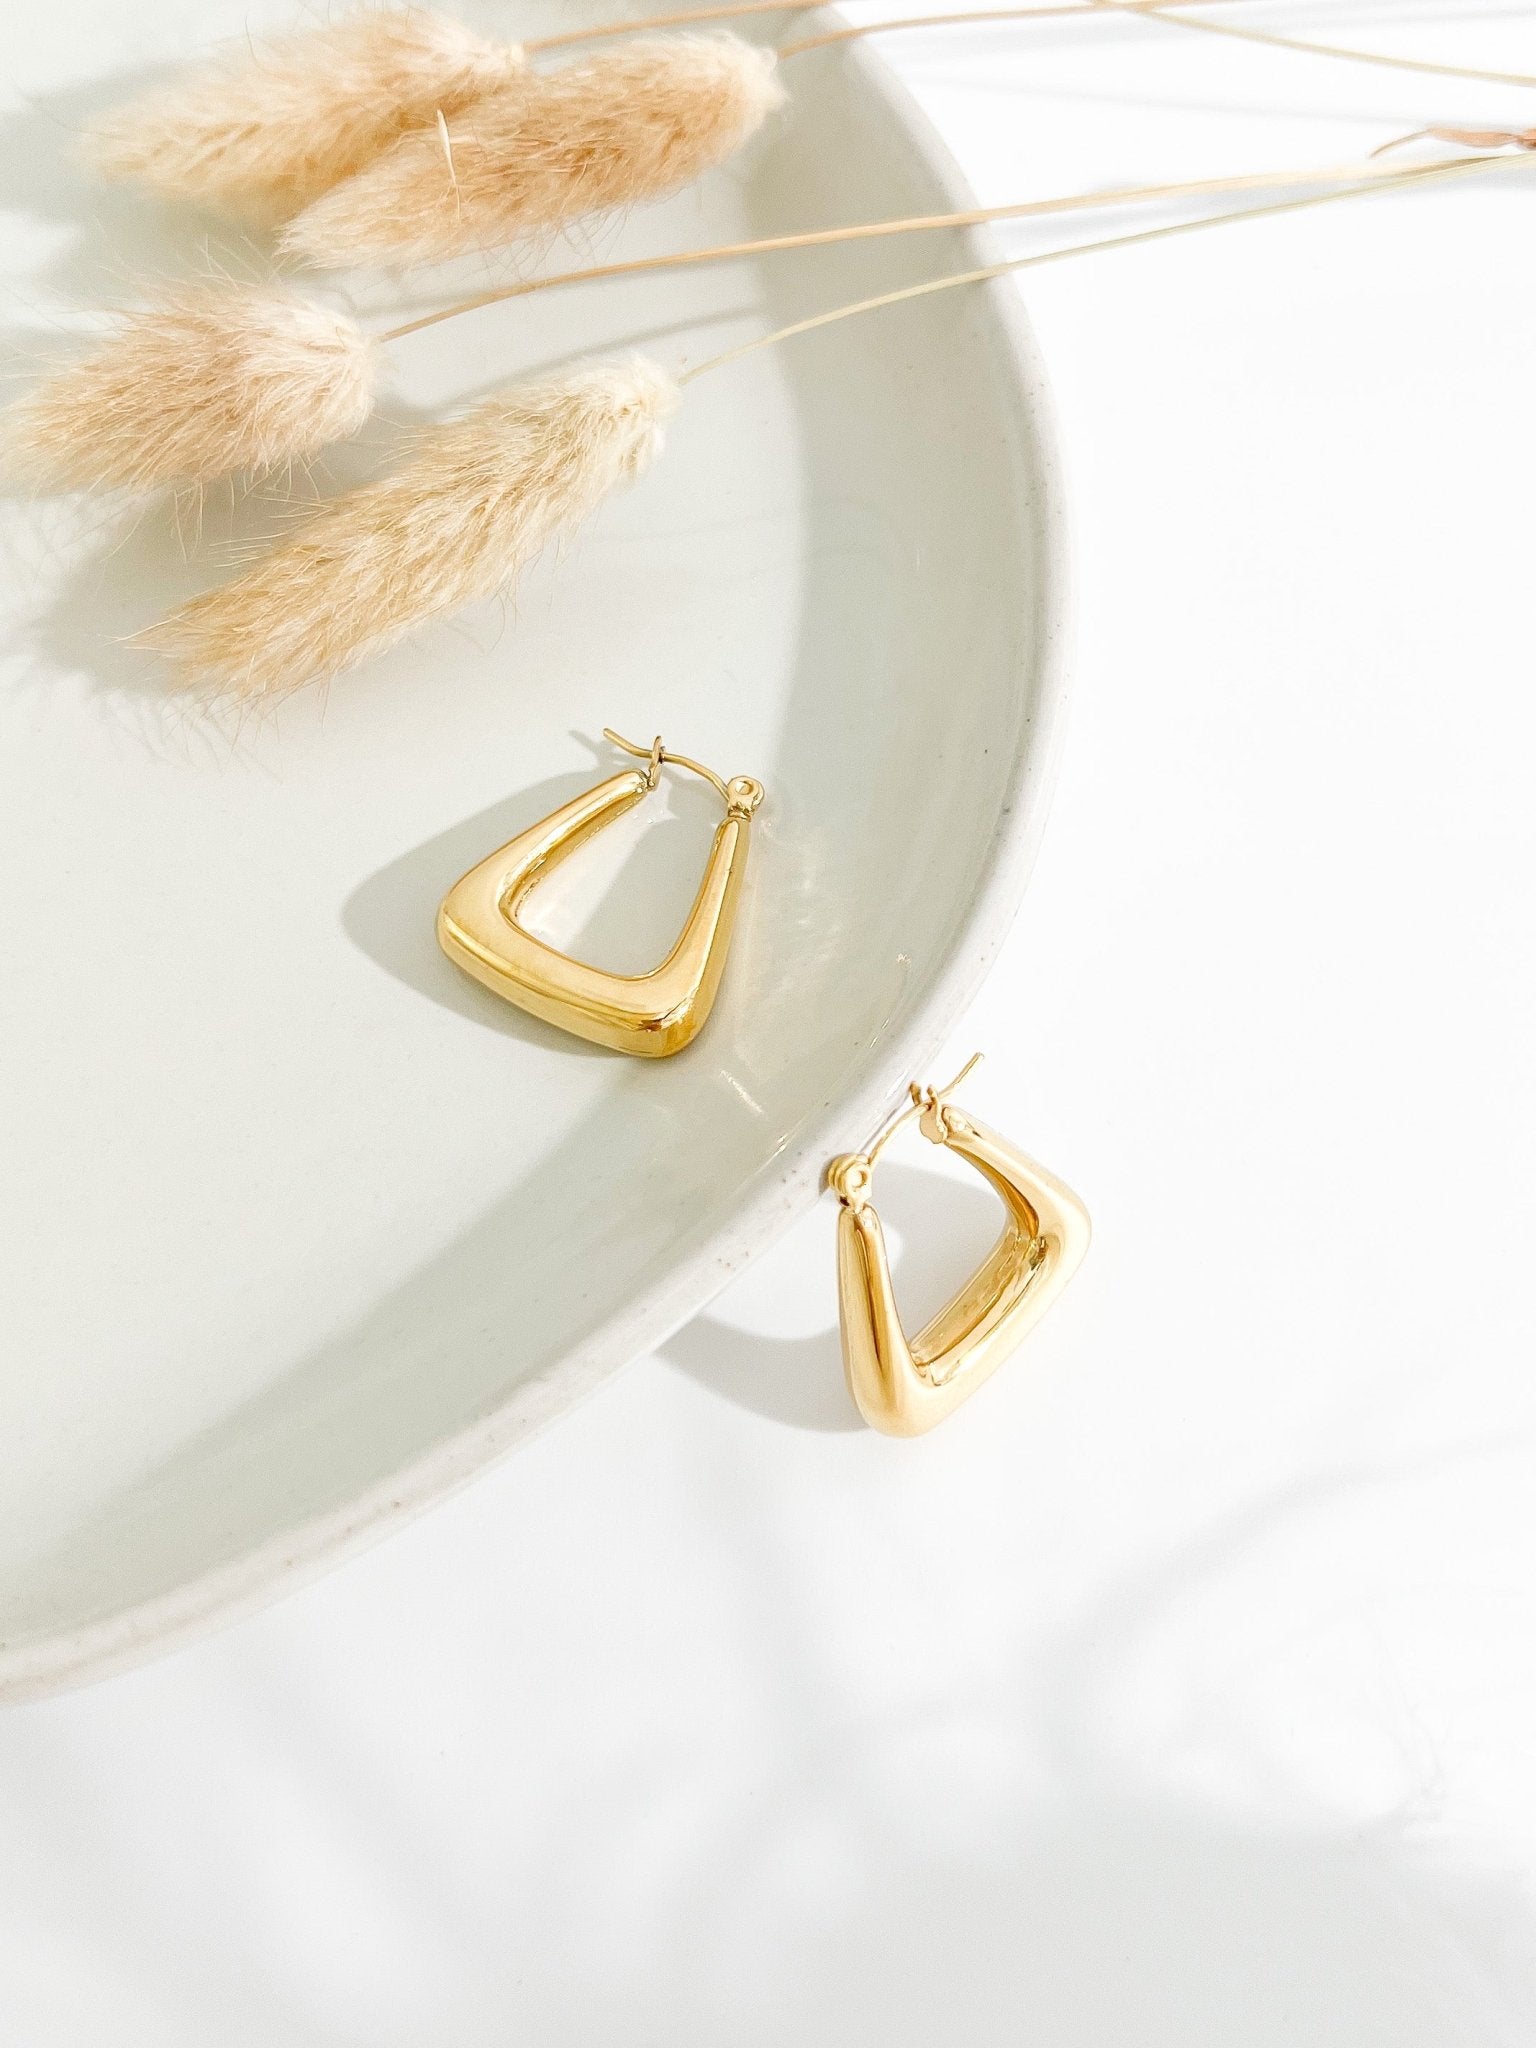 The Delta Hollow Earrings in Gold - Flaire & Co.